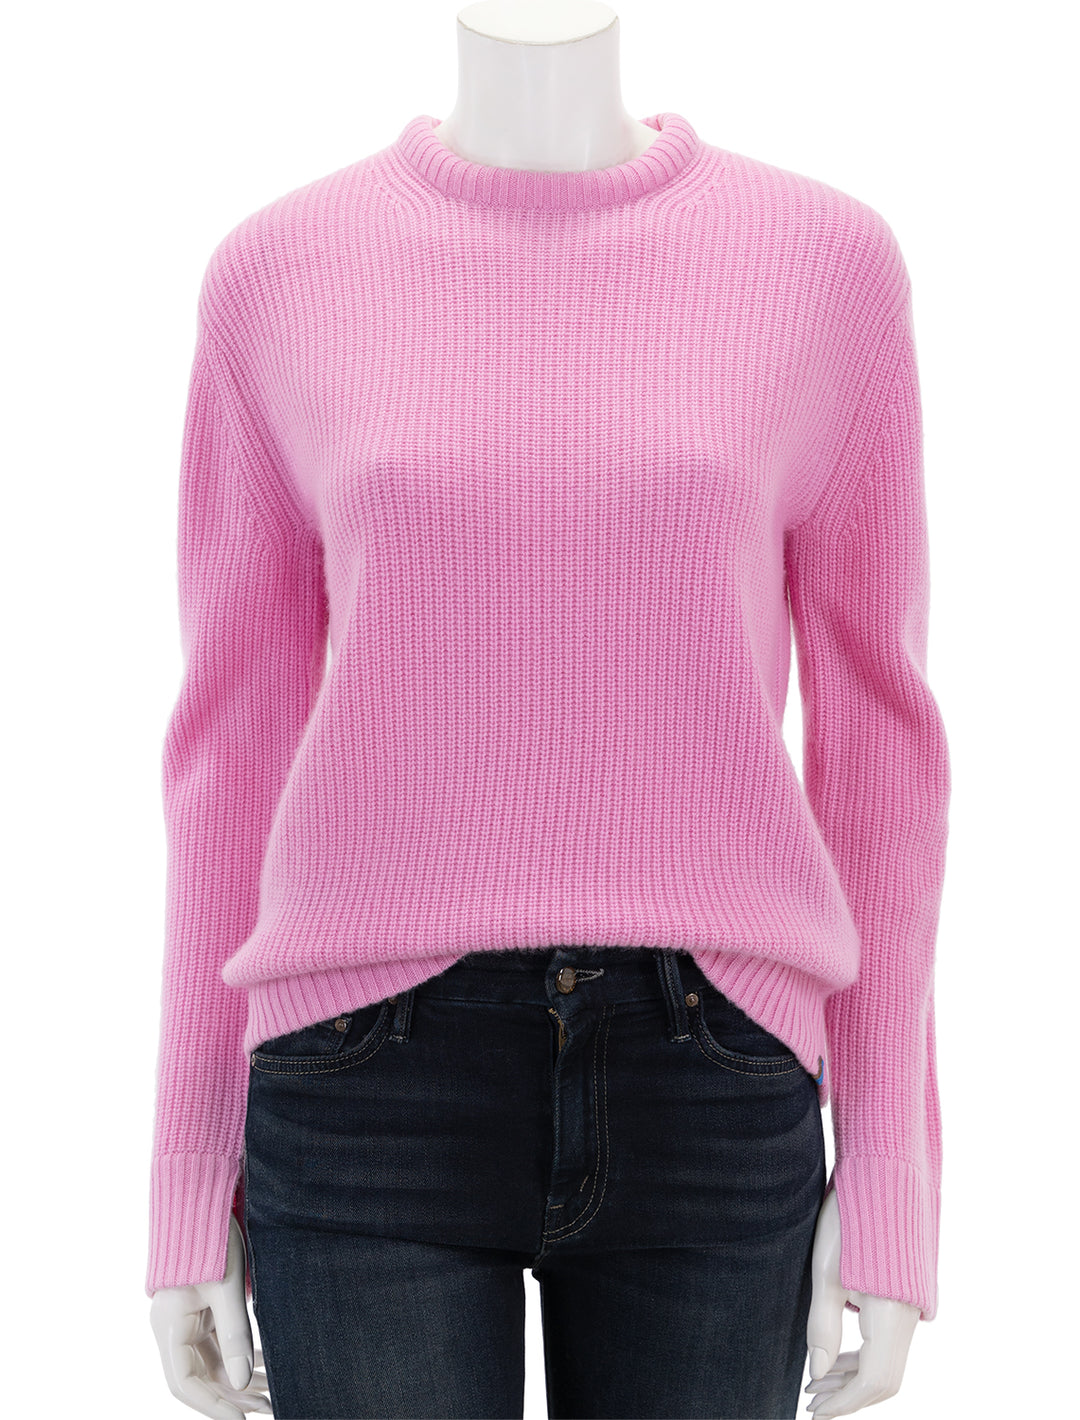 Front view of KULE's the alden sweater in pink.